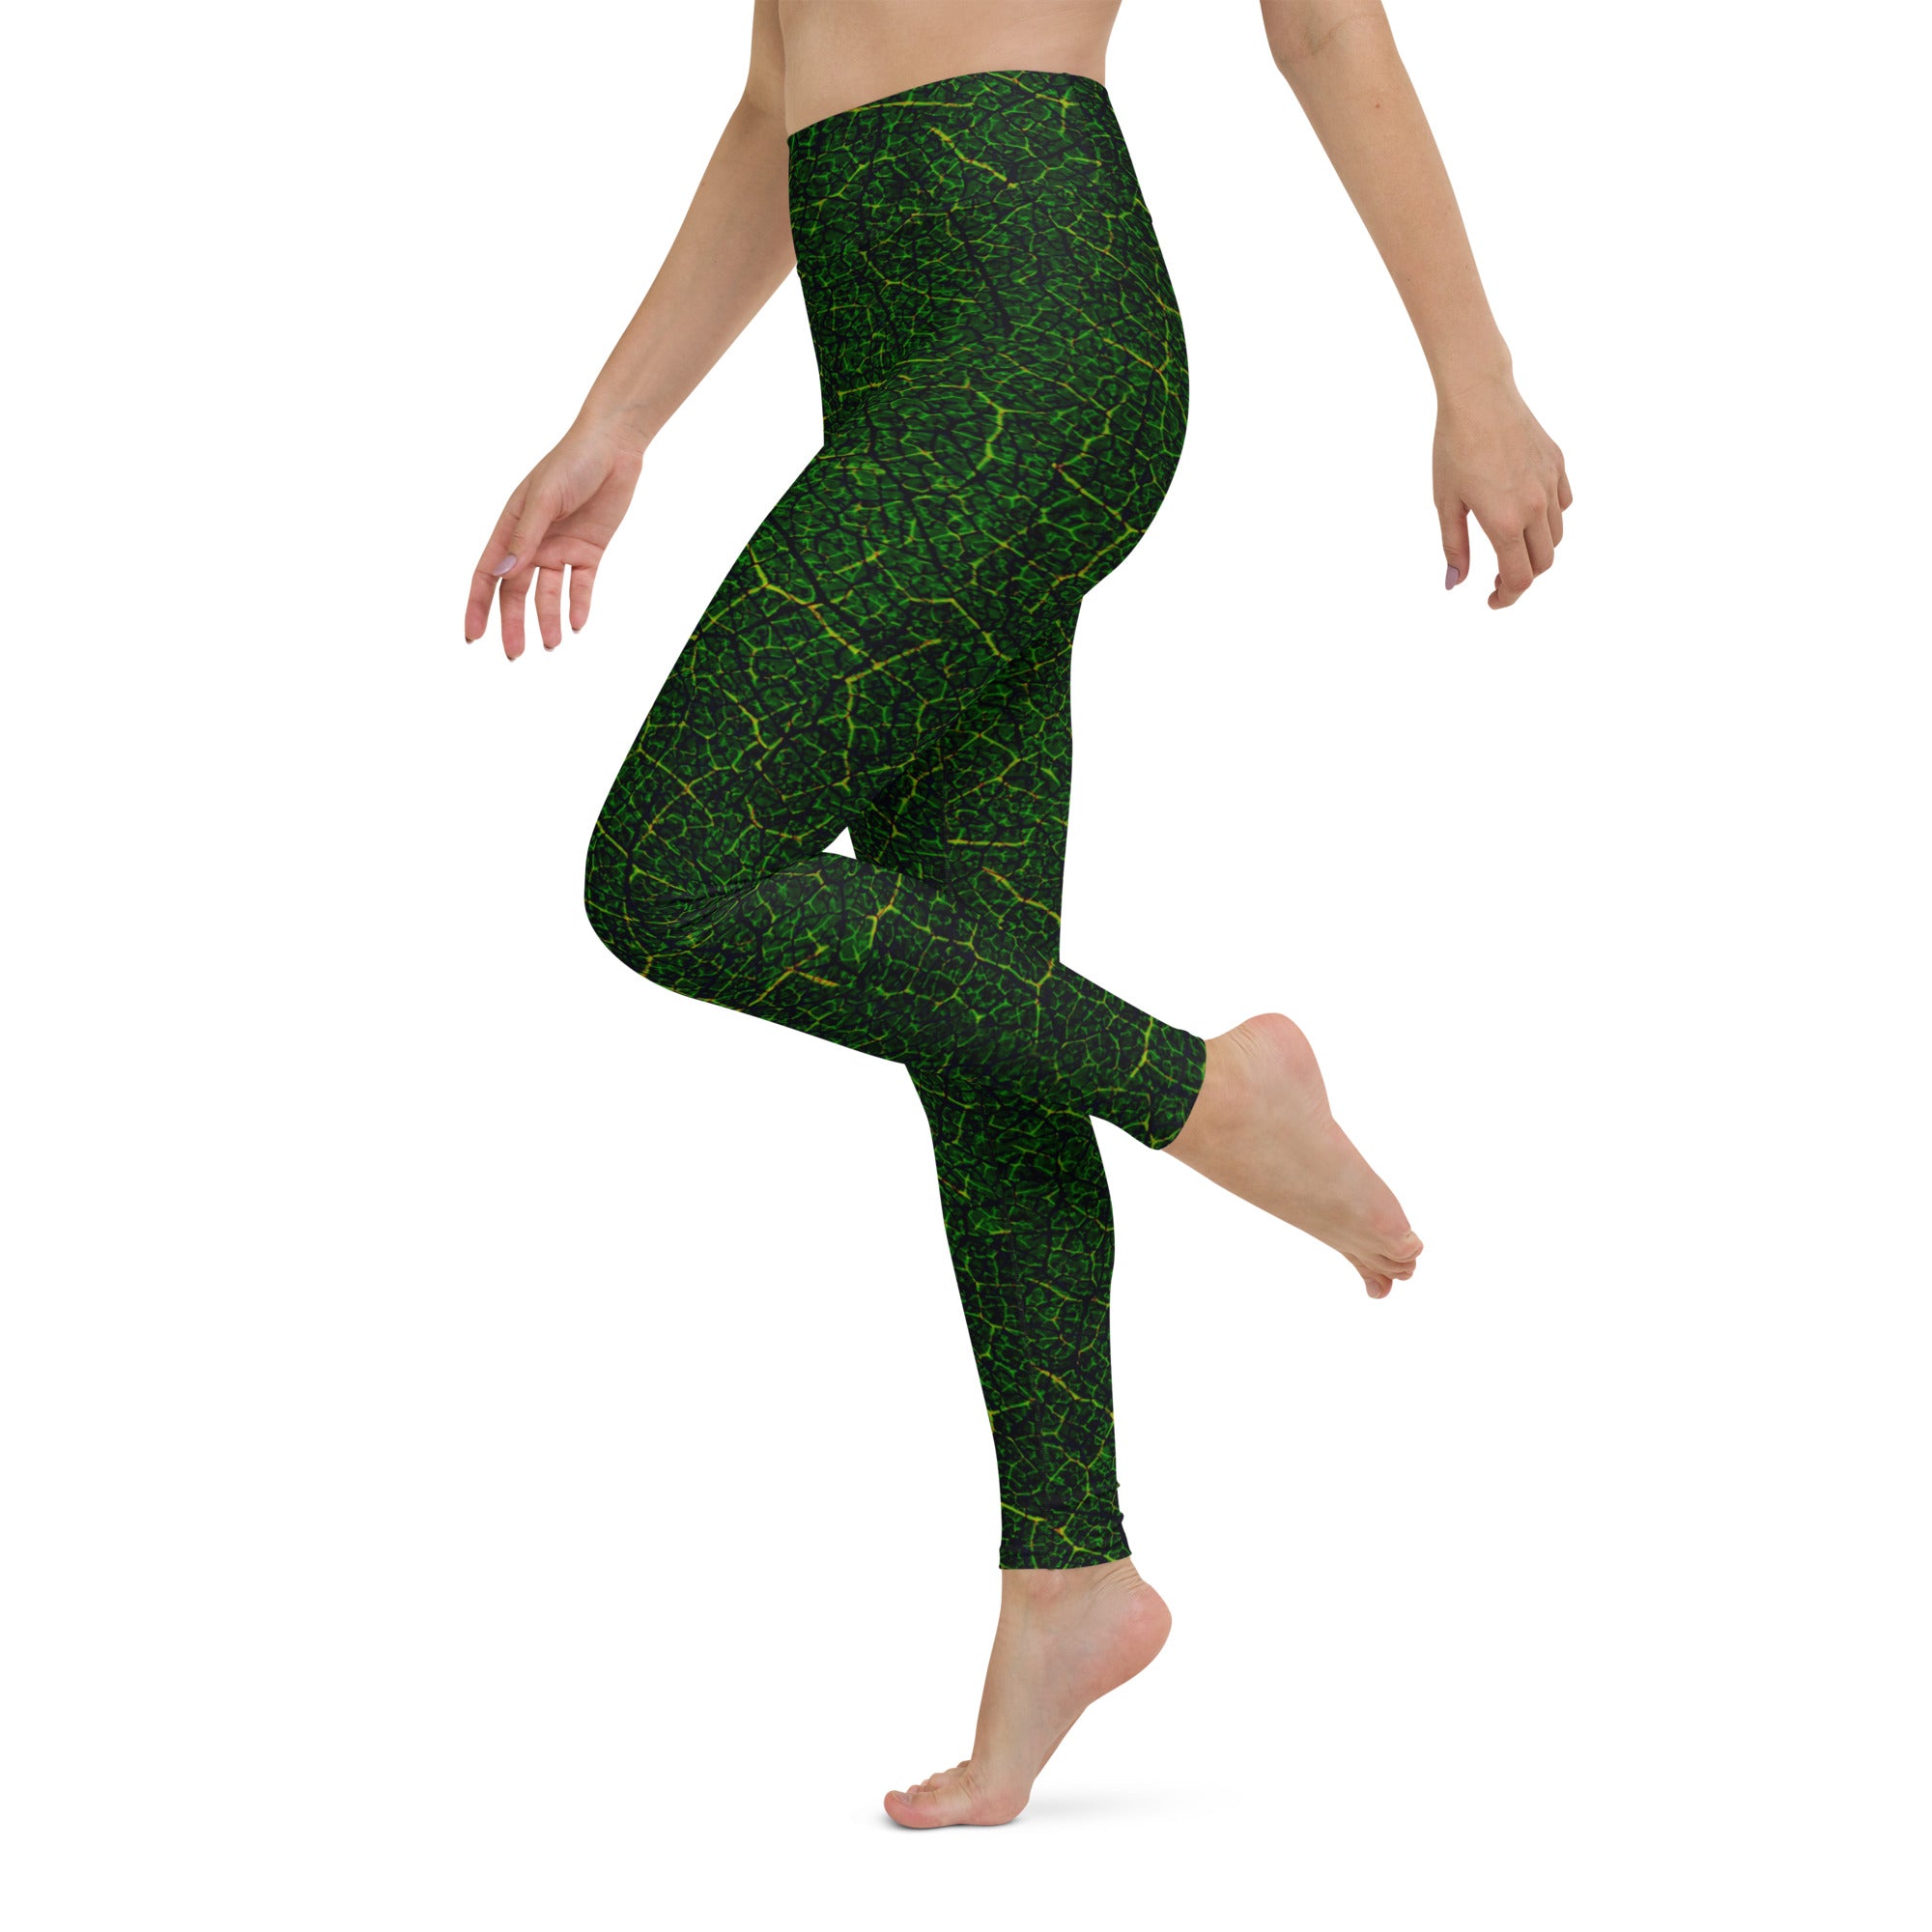 Practicing yoga in Verdant Vines Yoga Leggings, showcasing their vibrant vine design and supportive stretch for flexibility.